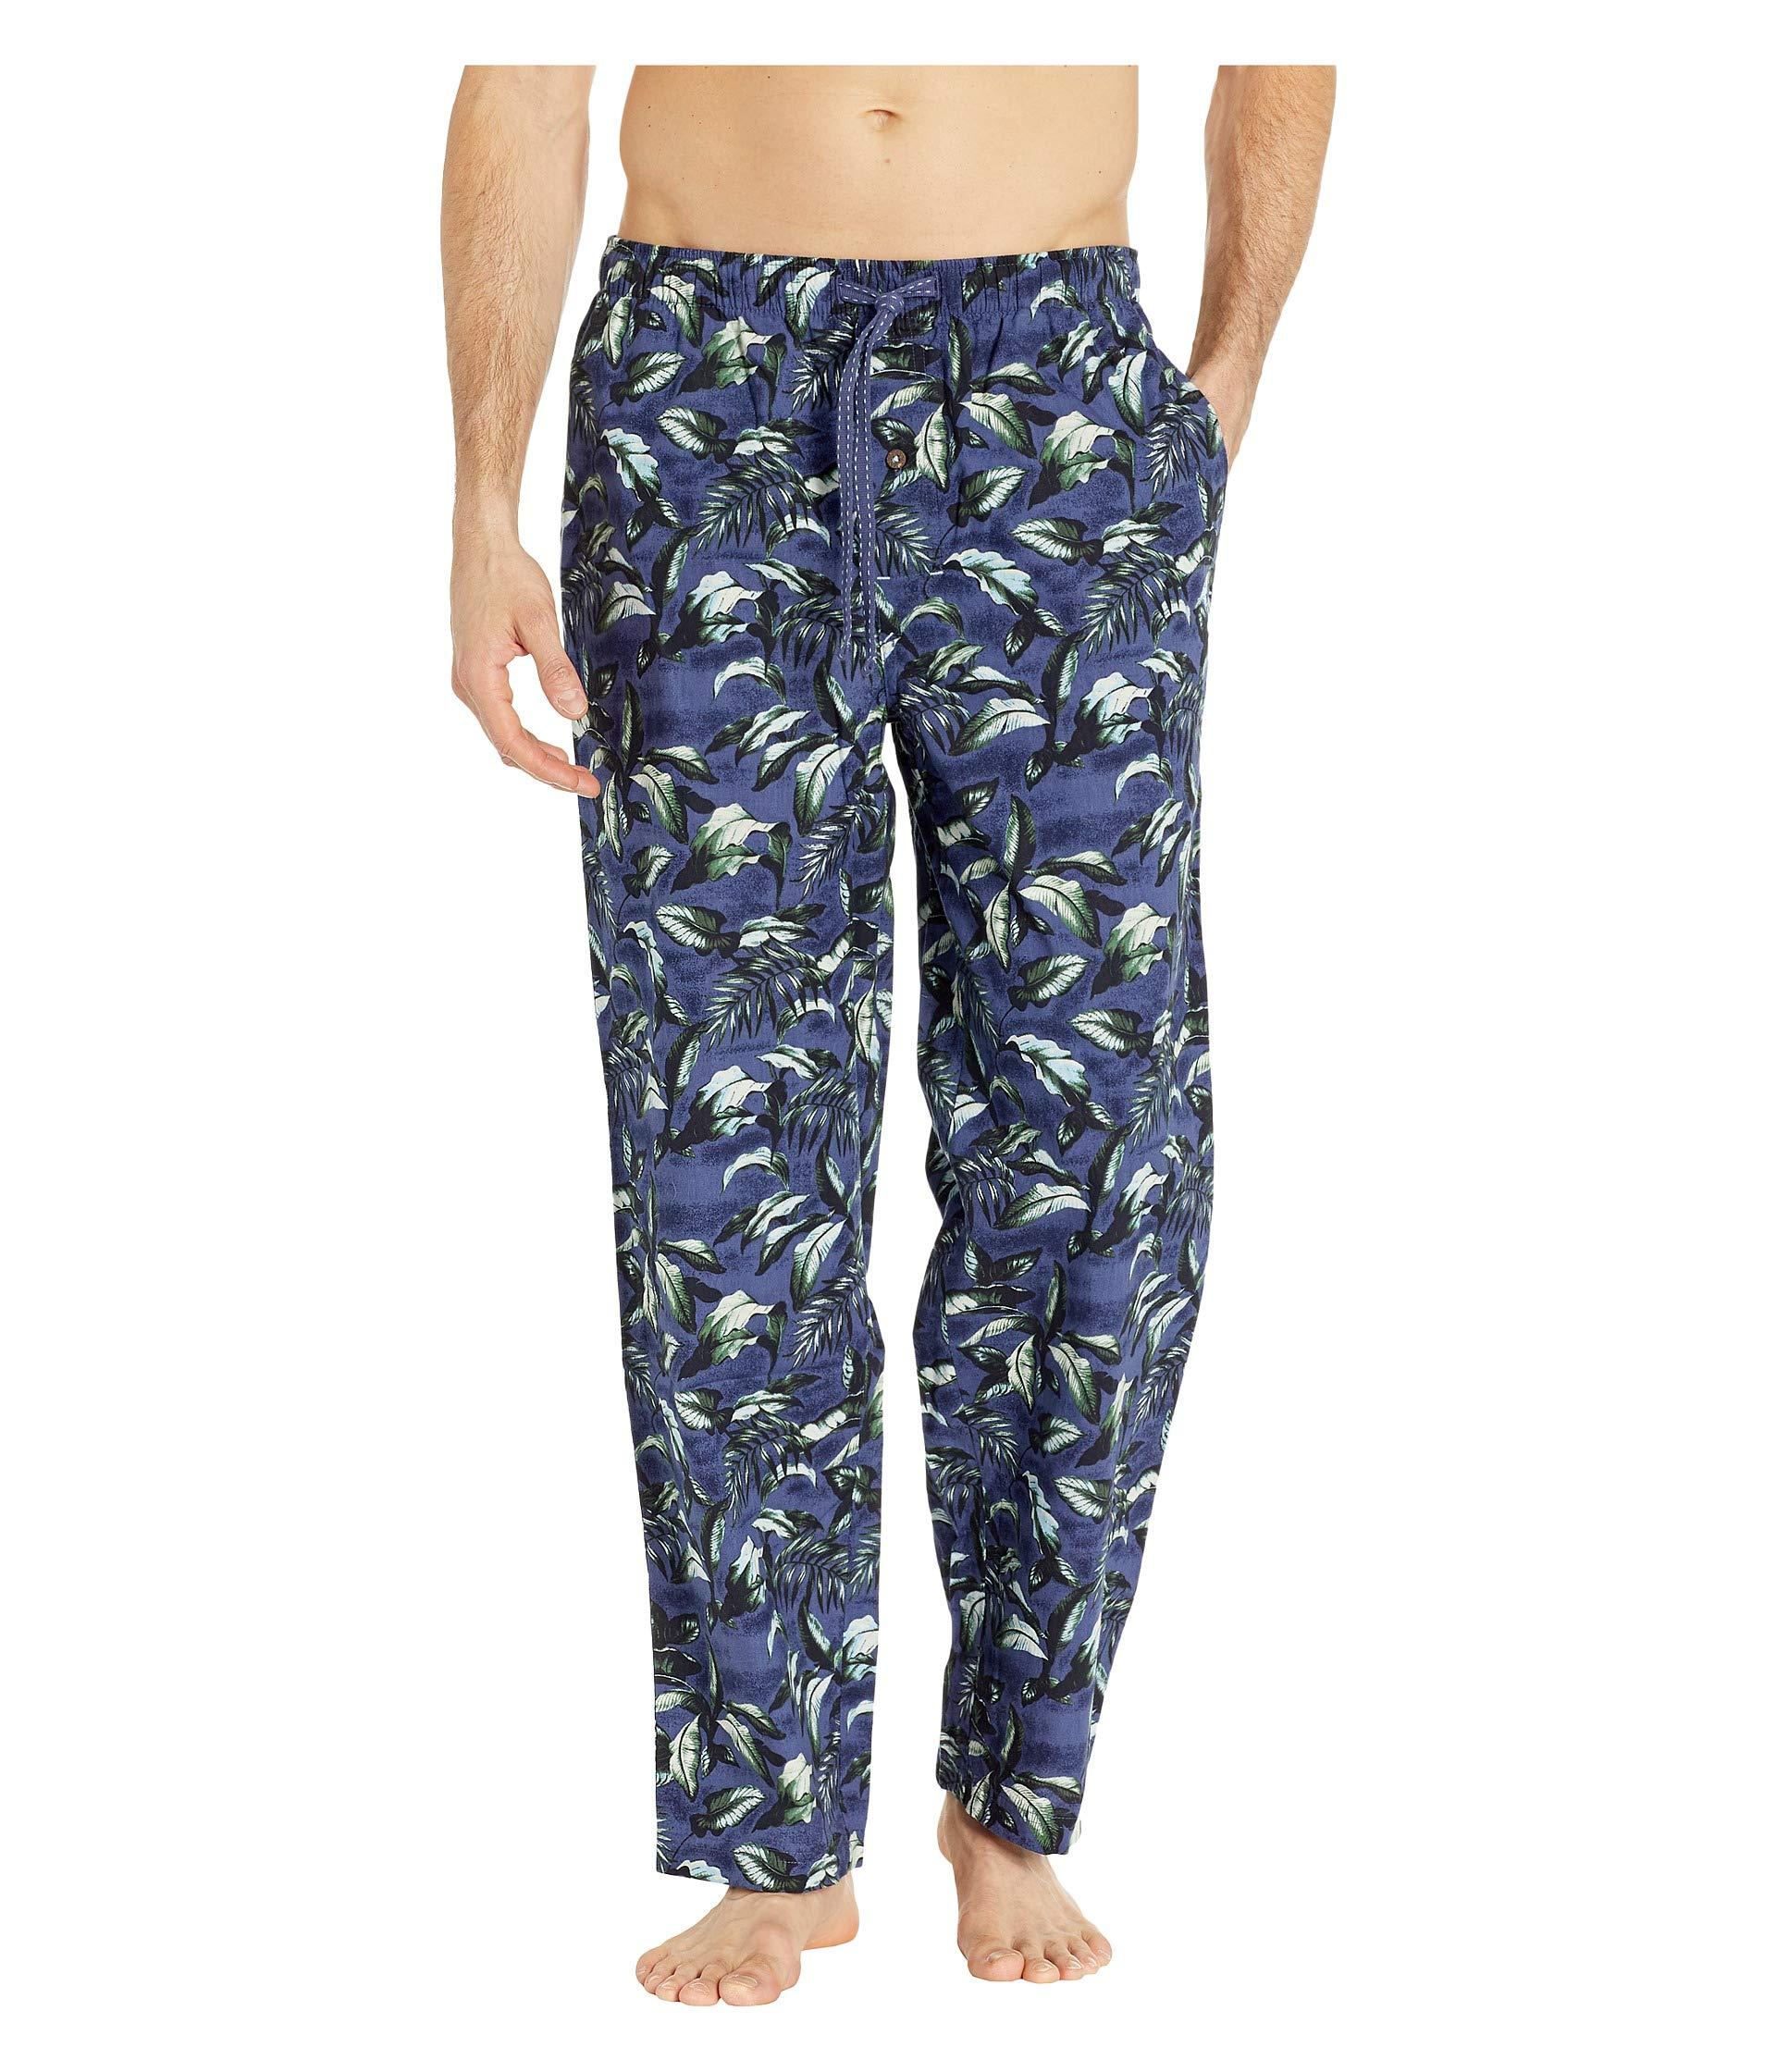 Lyst - Tommy Bahama Island Washed Cotton Woven Pants (big Leaves Navy ...